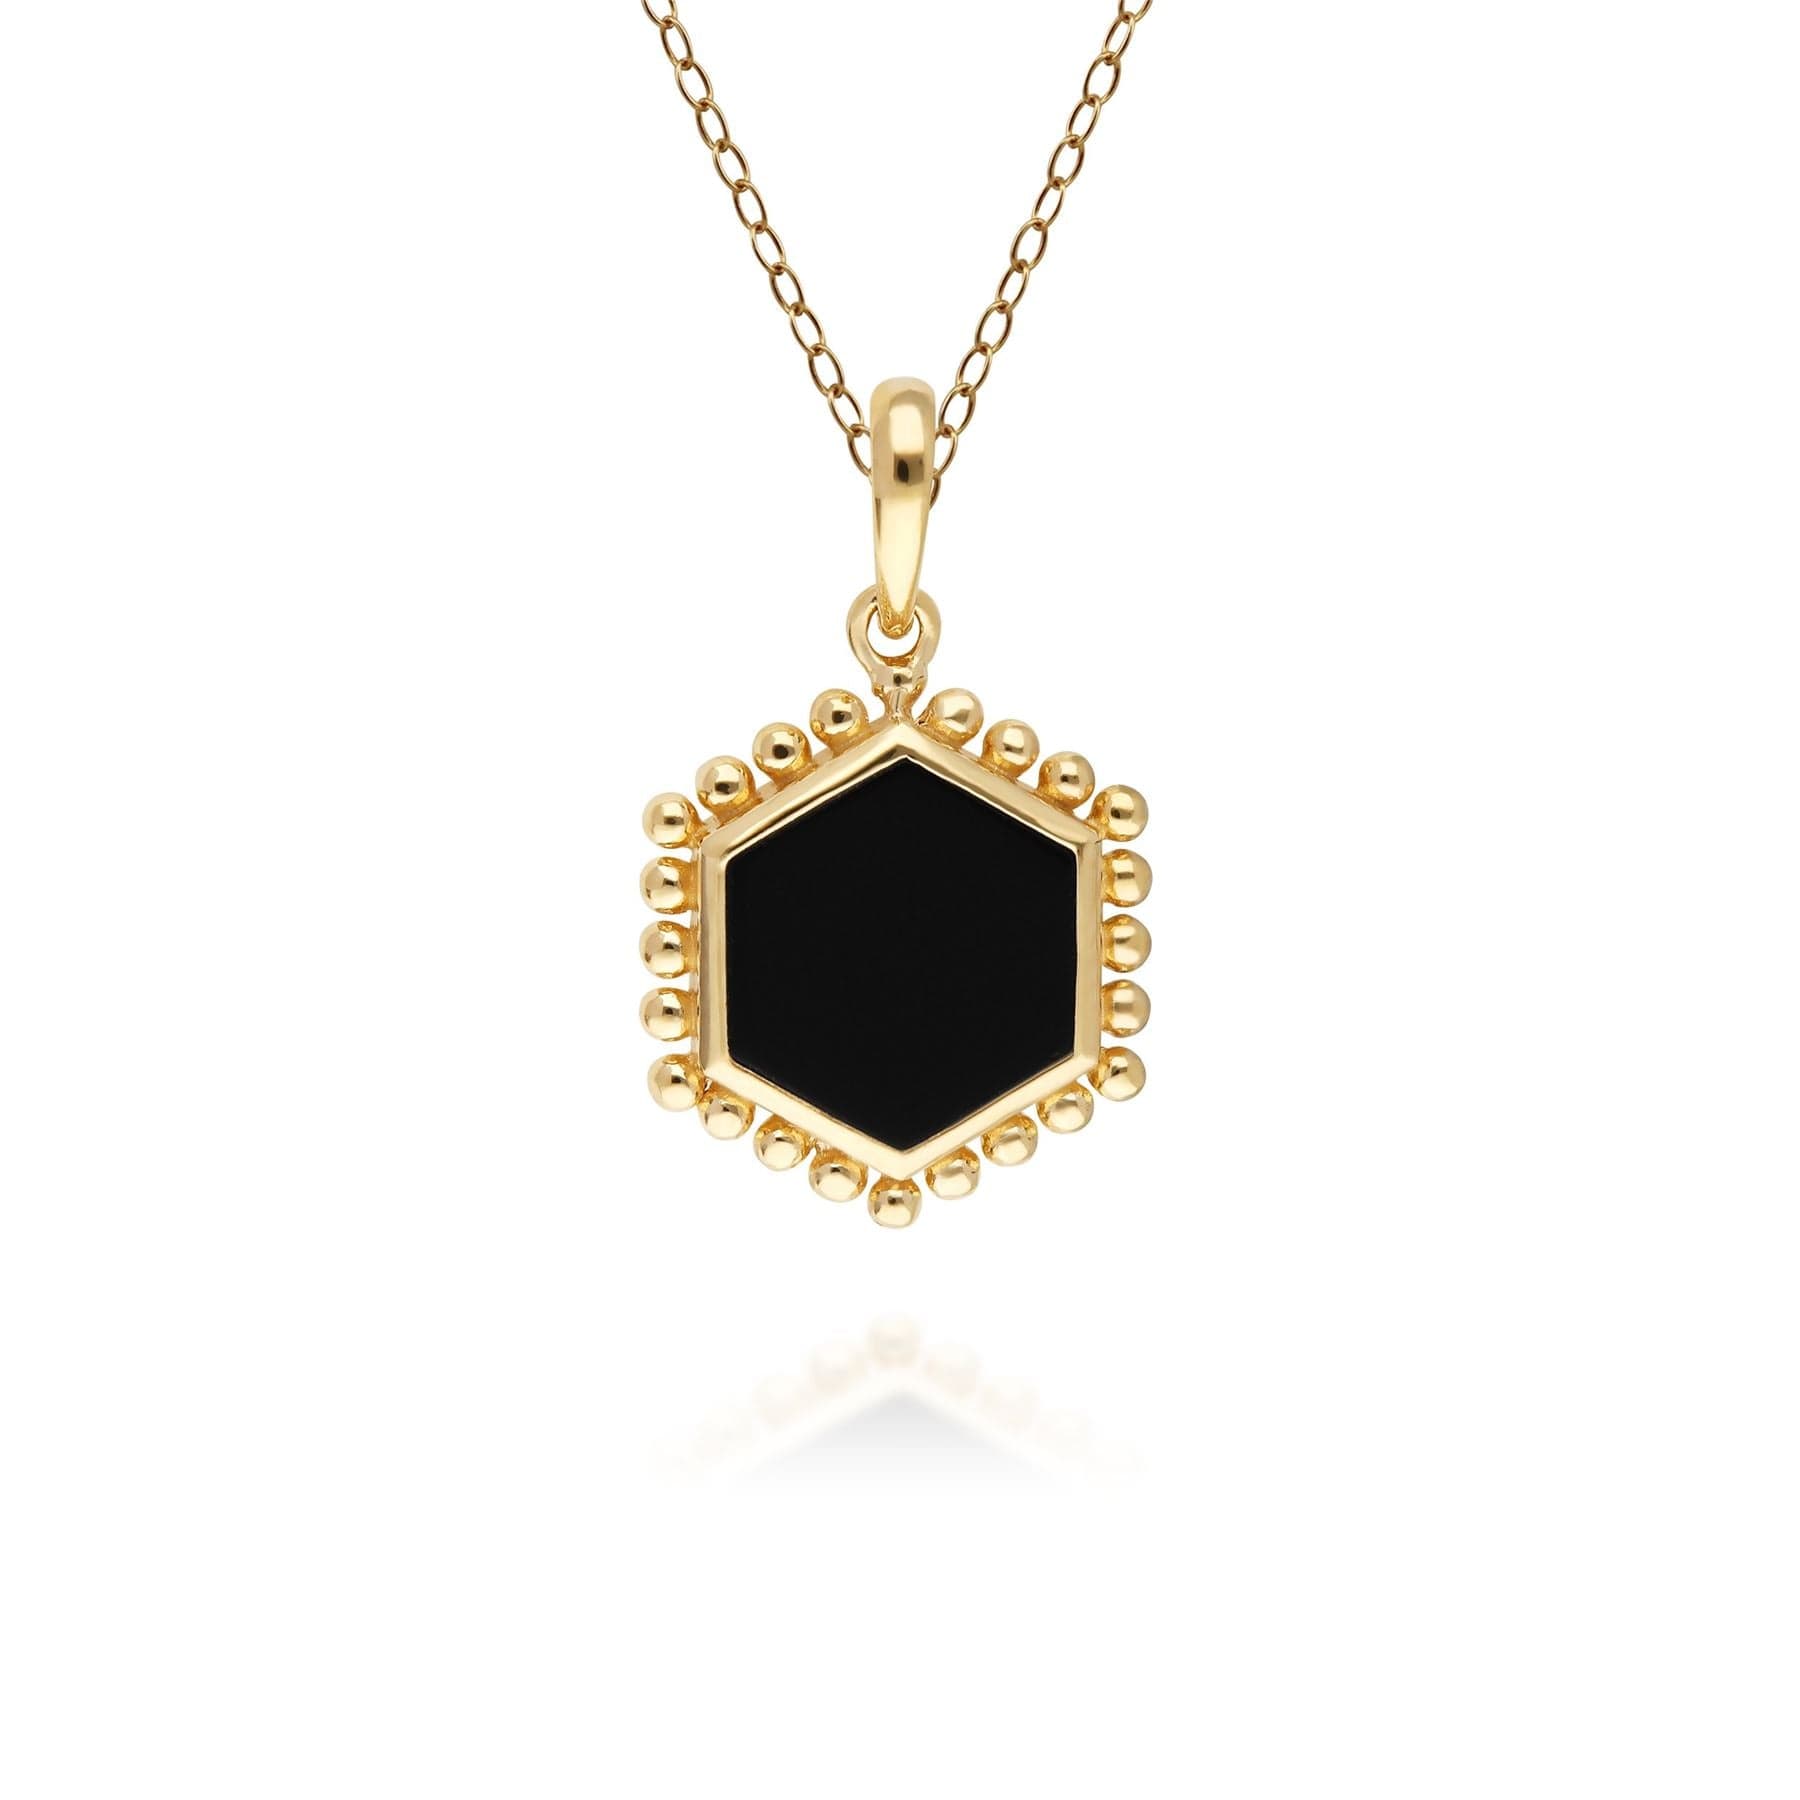 Photos - Pendant / Choker Necklace Black Onyx Flat Slice Hex Pendant in Gold Plated Sterling Silver